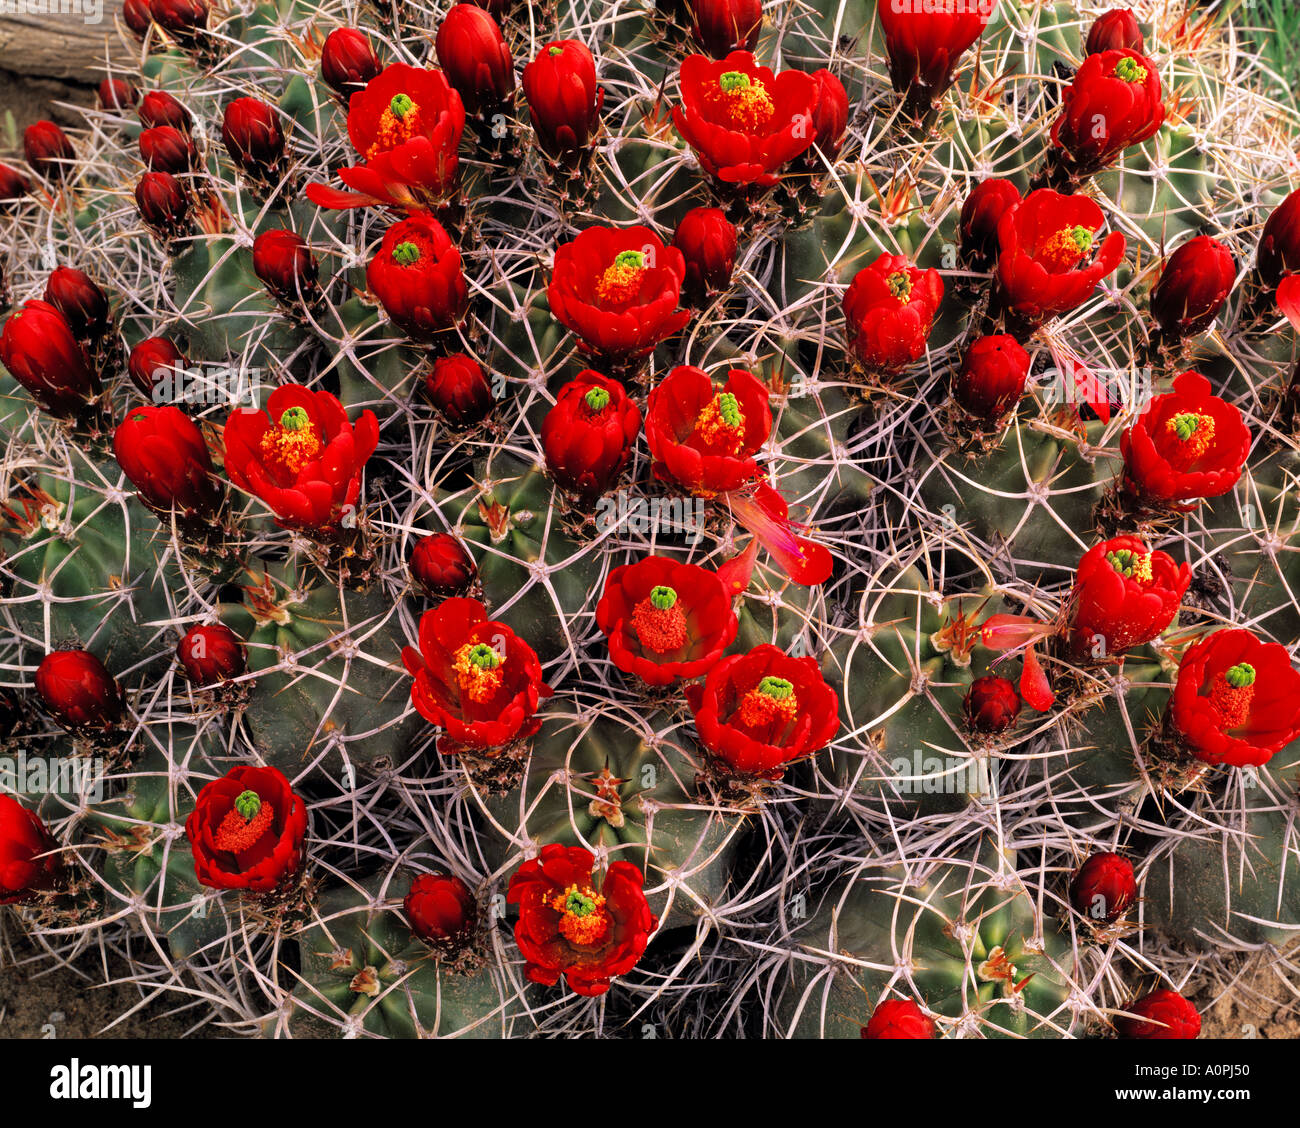 Cactus Claretcup Chaco Culture National Historical Park New Mexico Foto Stock